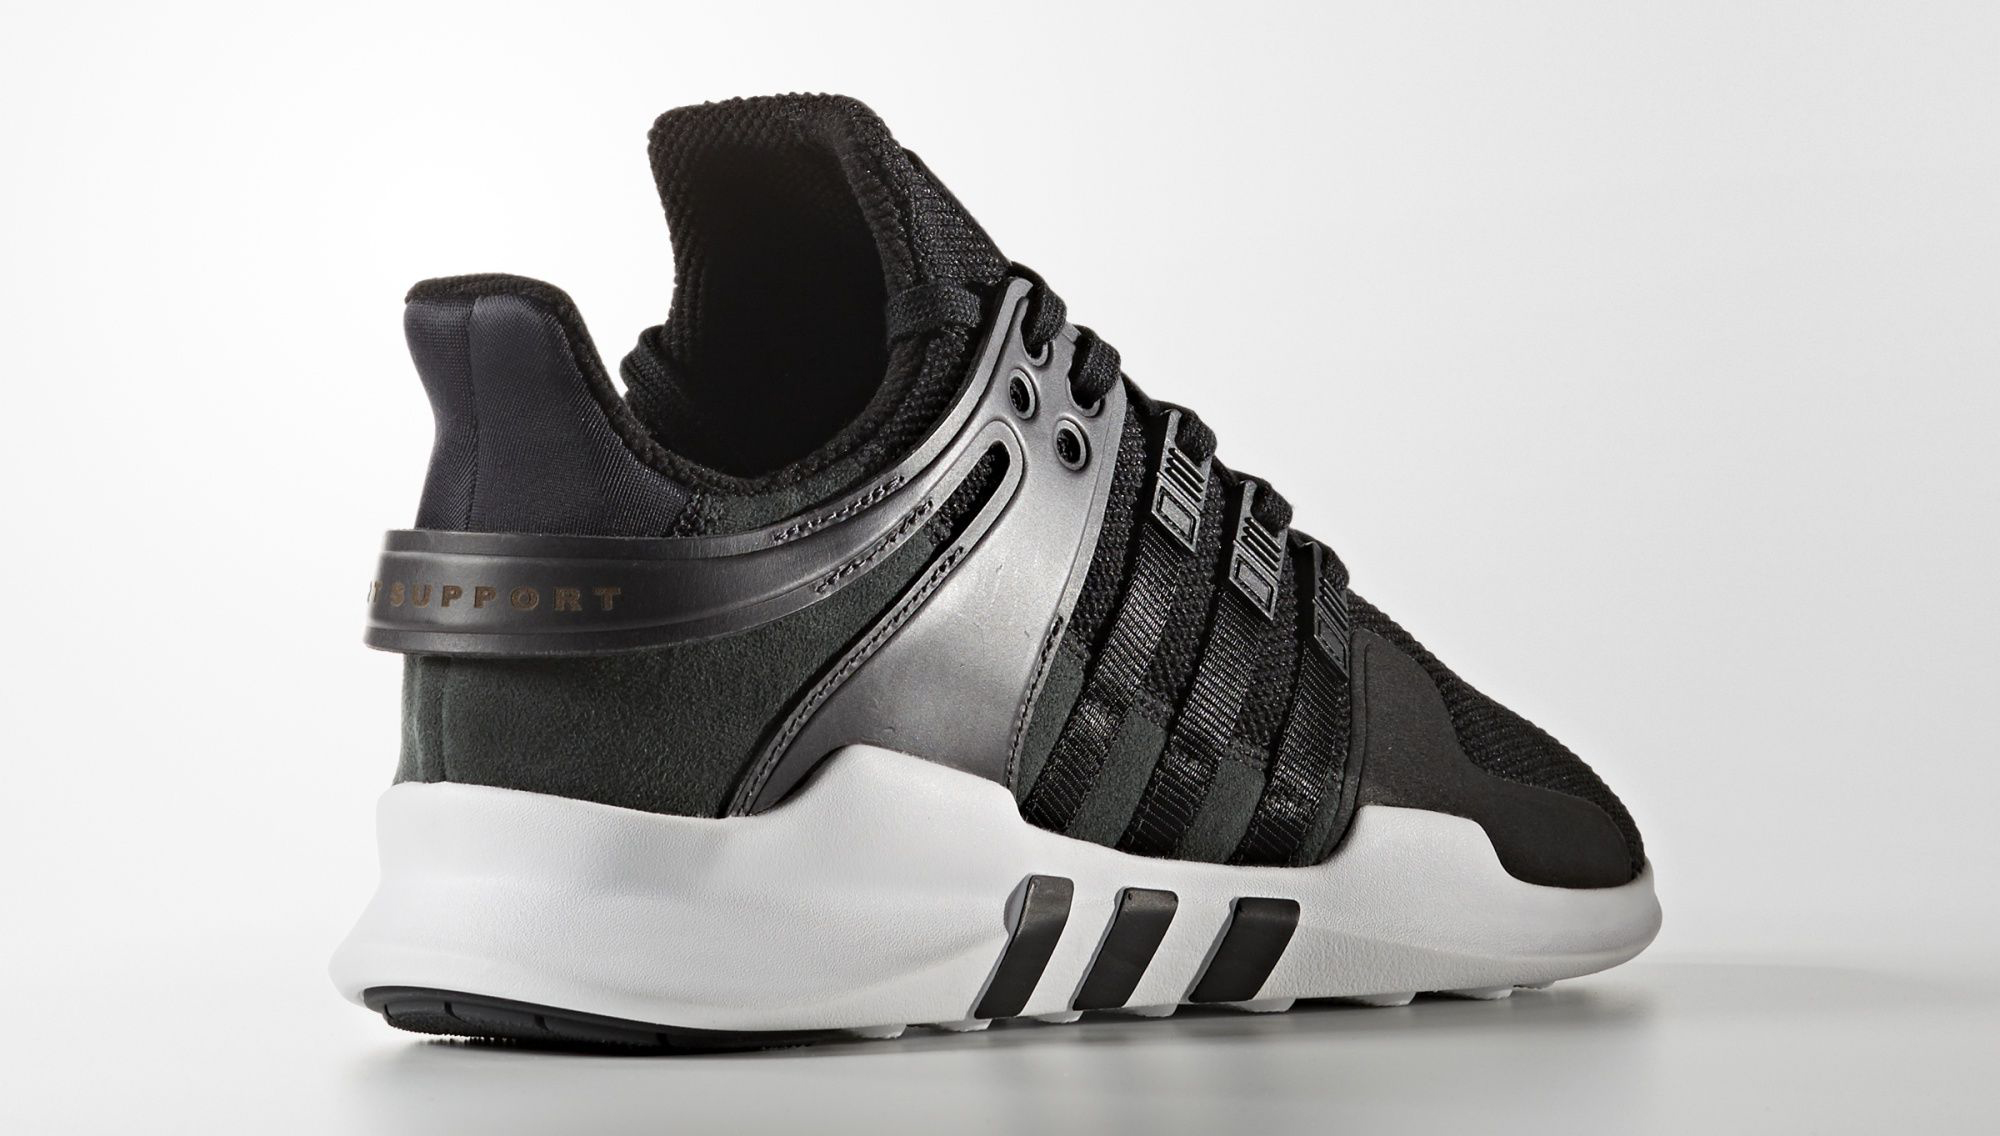 adidas-eqt-support-adv-milled-leather-pack-1